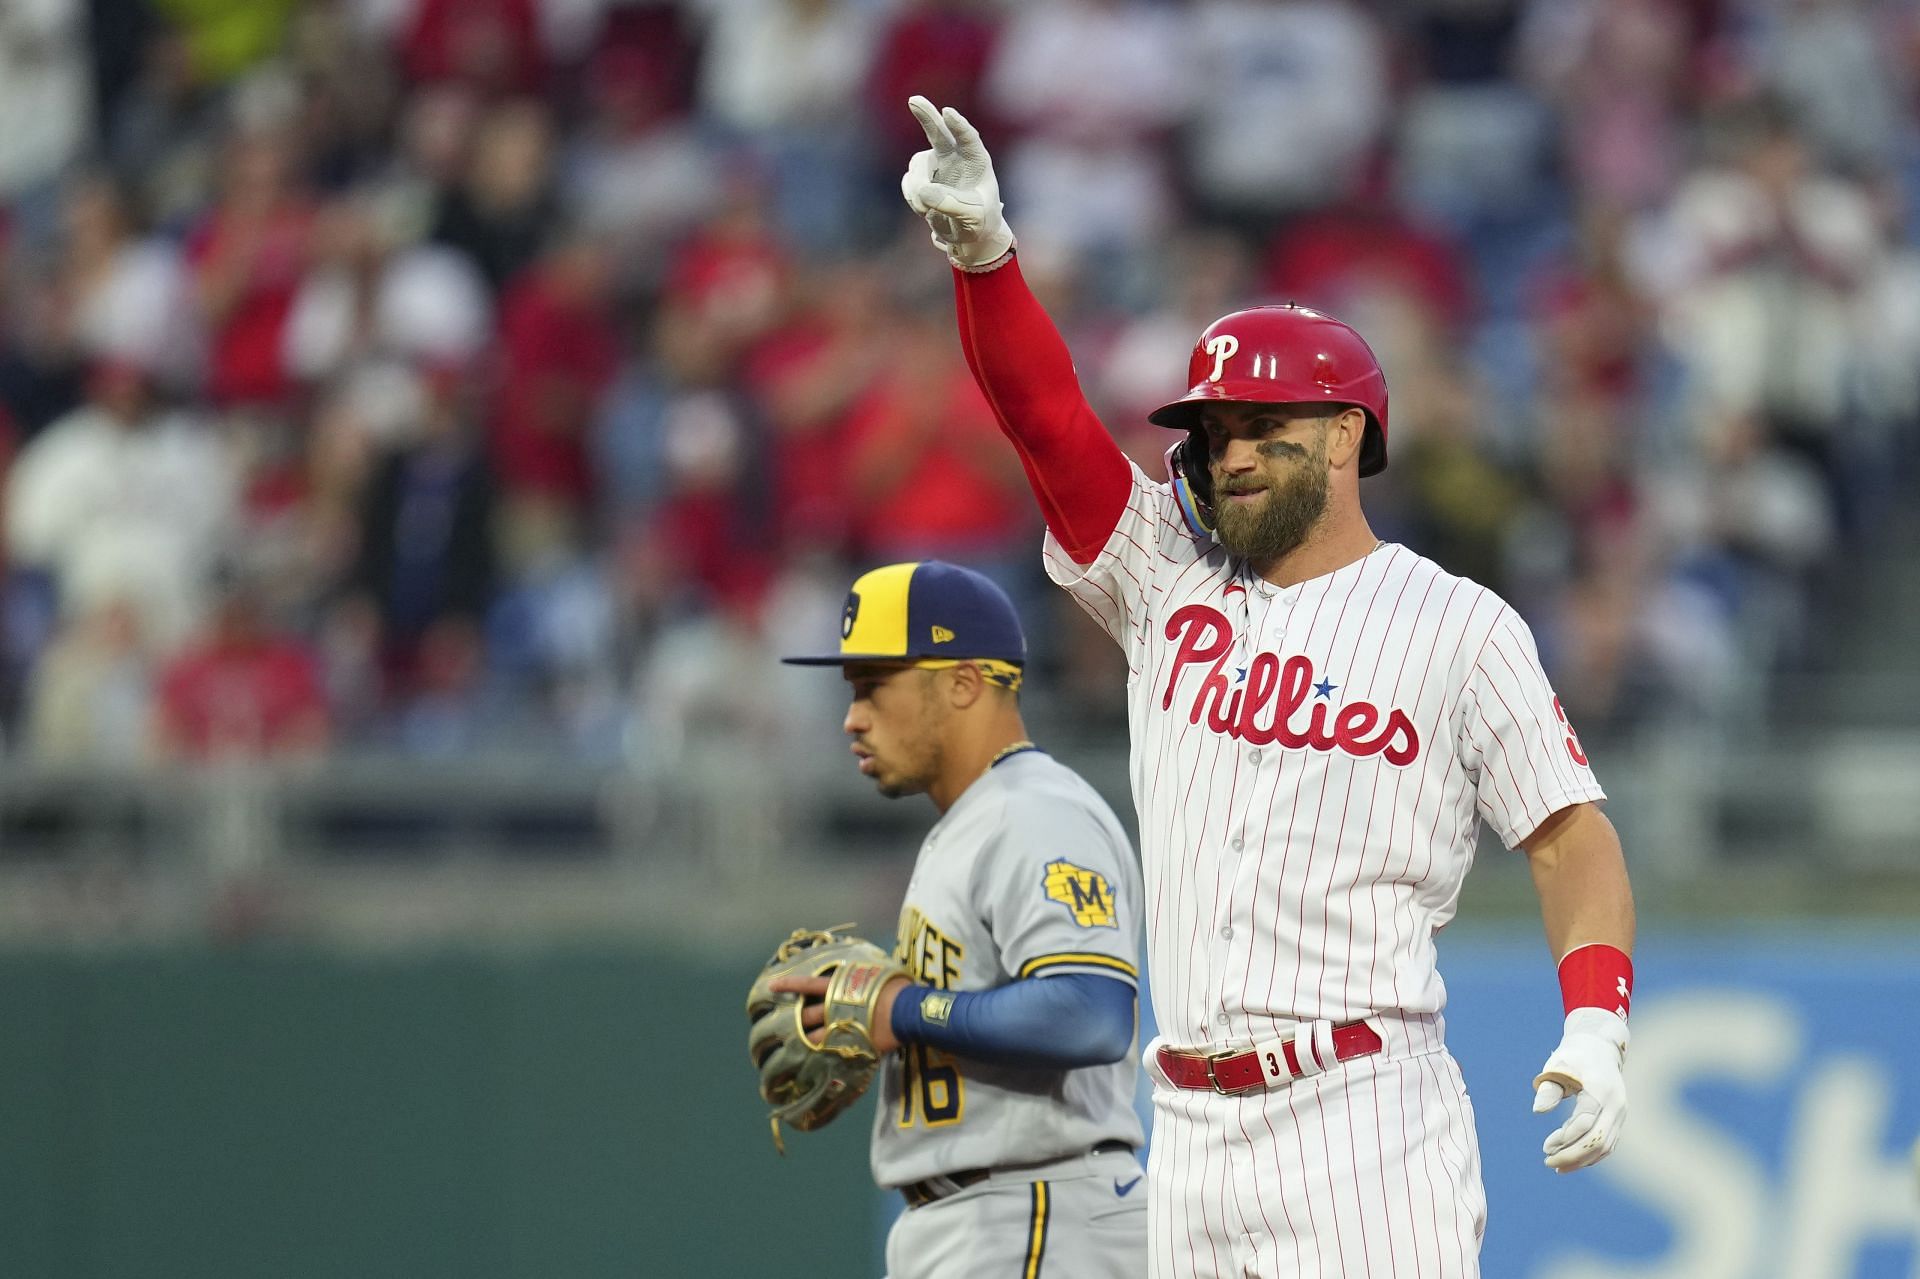 Bryce Harper leads the Phillies with 13 RBIs